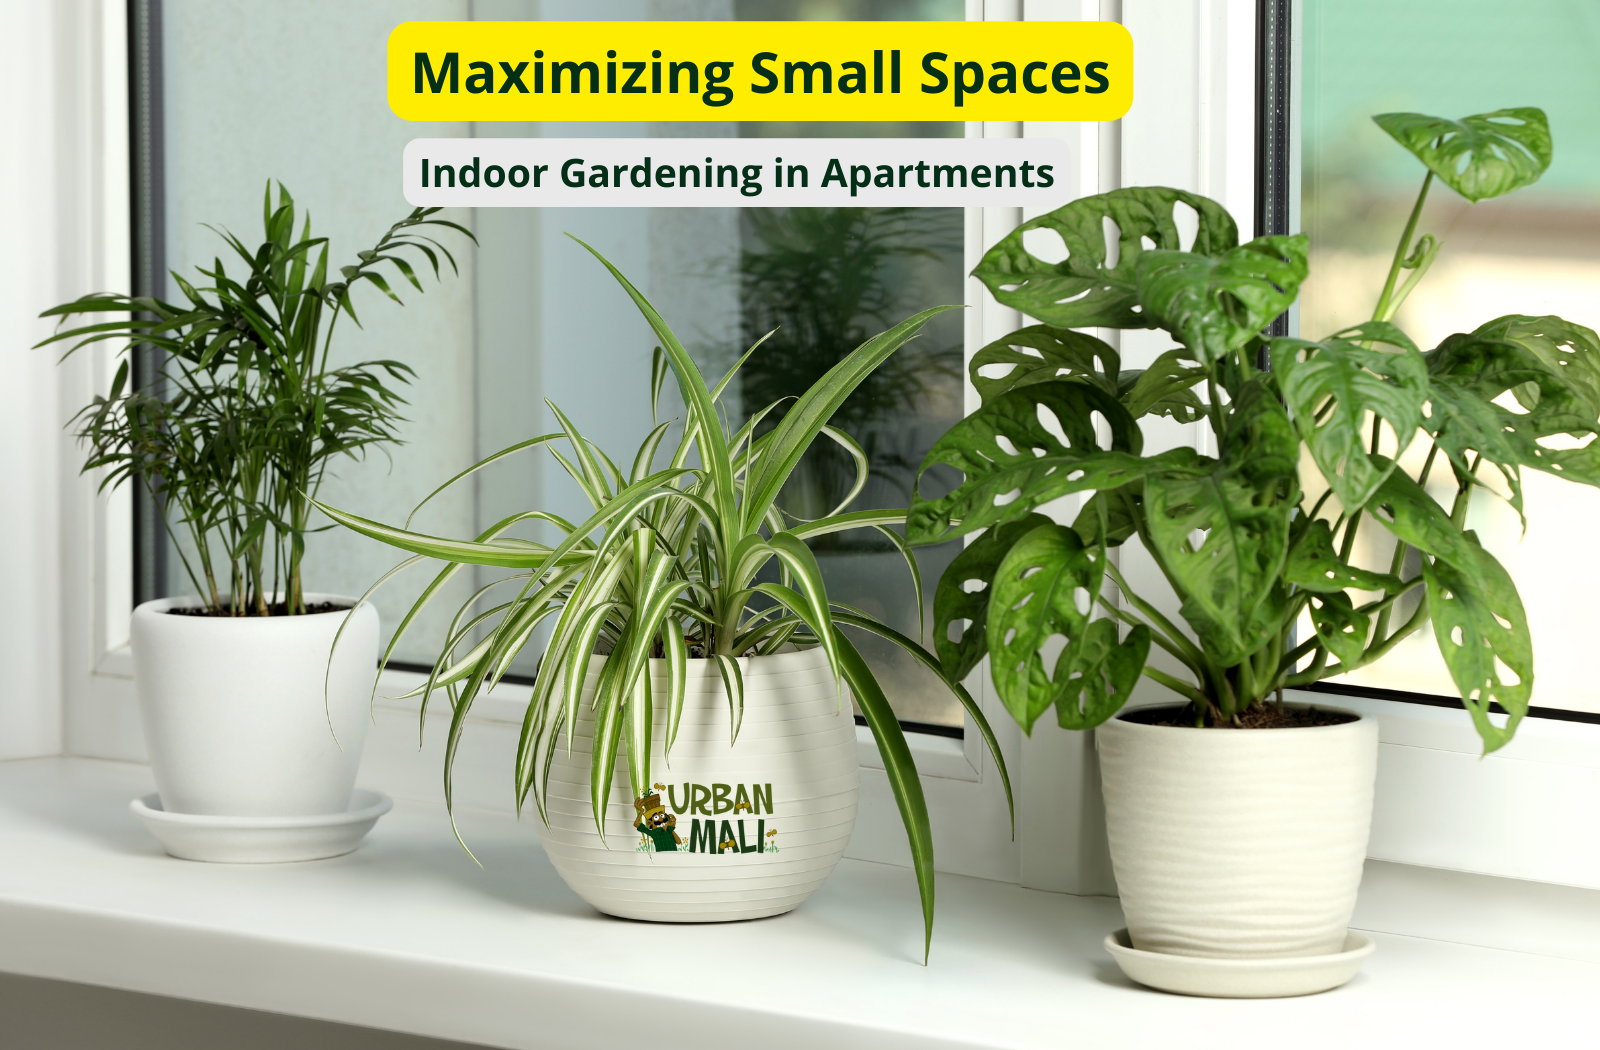 Maximizing Small Spaces: Indoor Gardening in Apartments